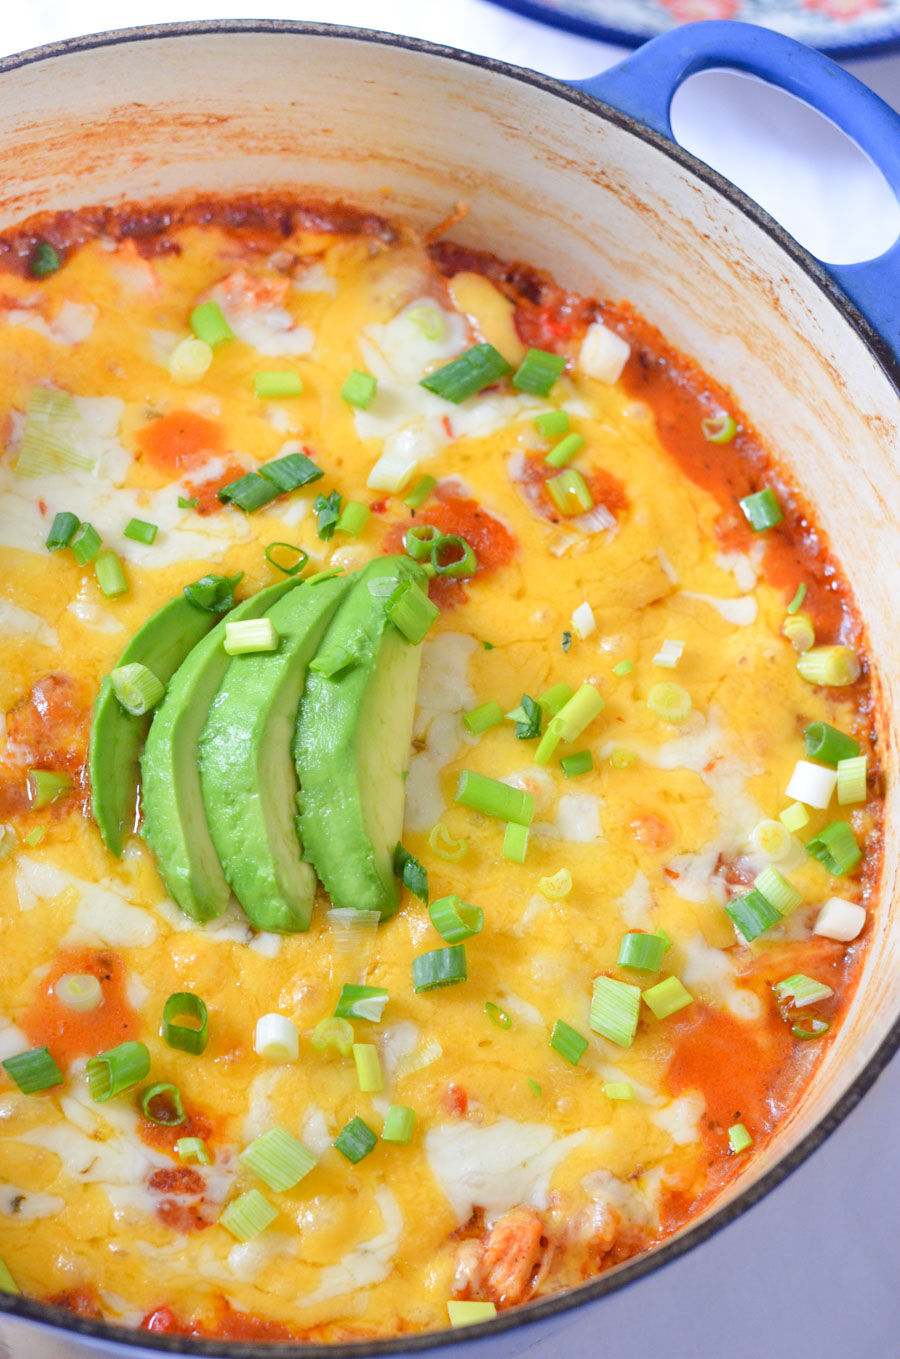 One Pot Mexican Casserole Weeknight Dinner w. Shredded Chicken and Rice/Quinoa